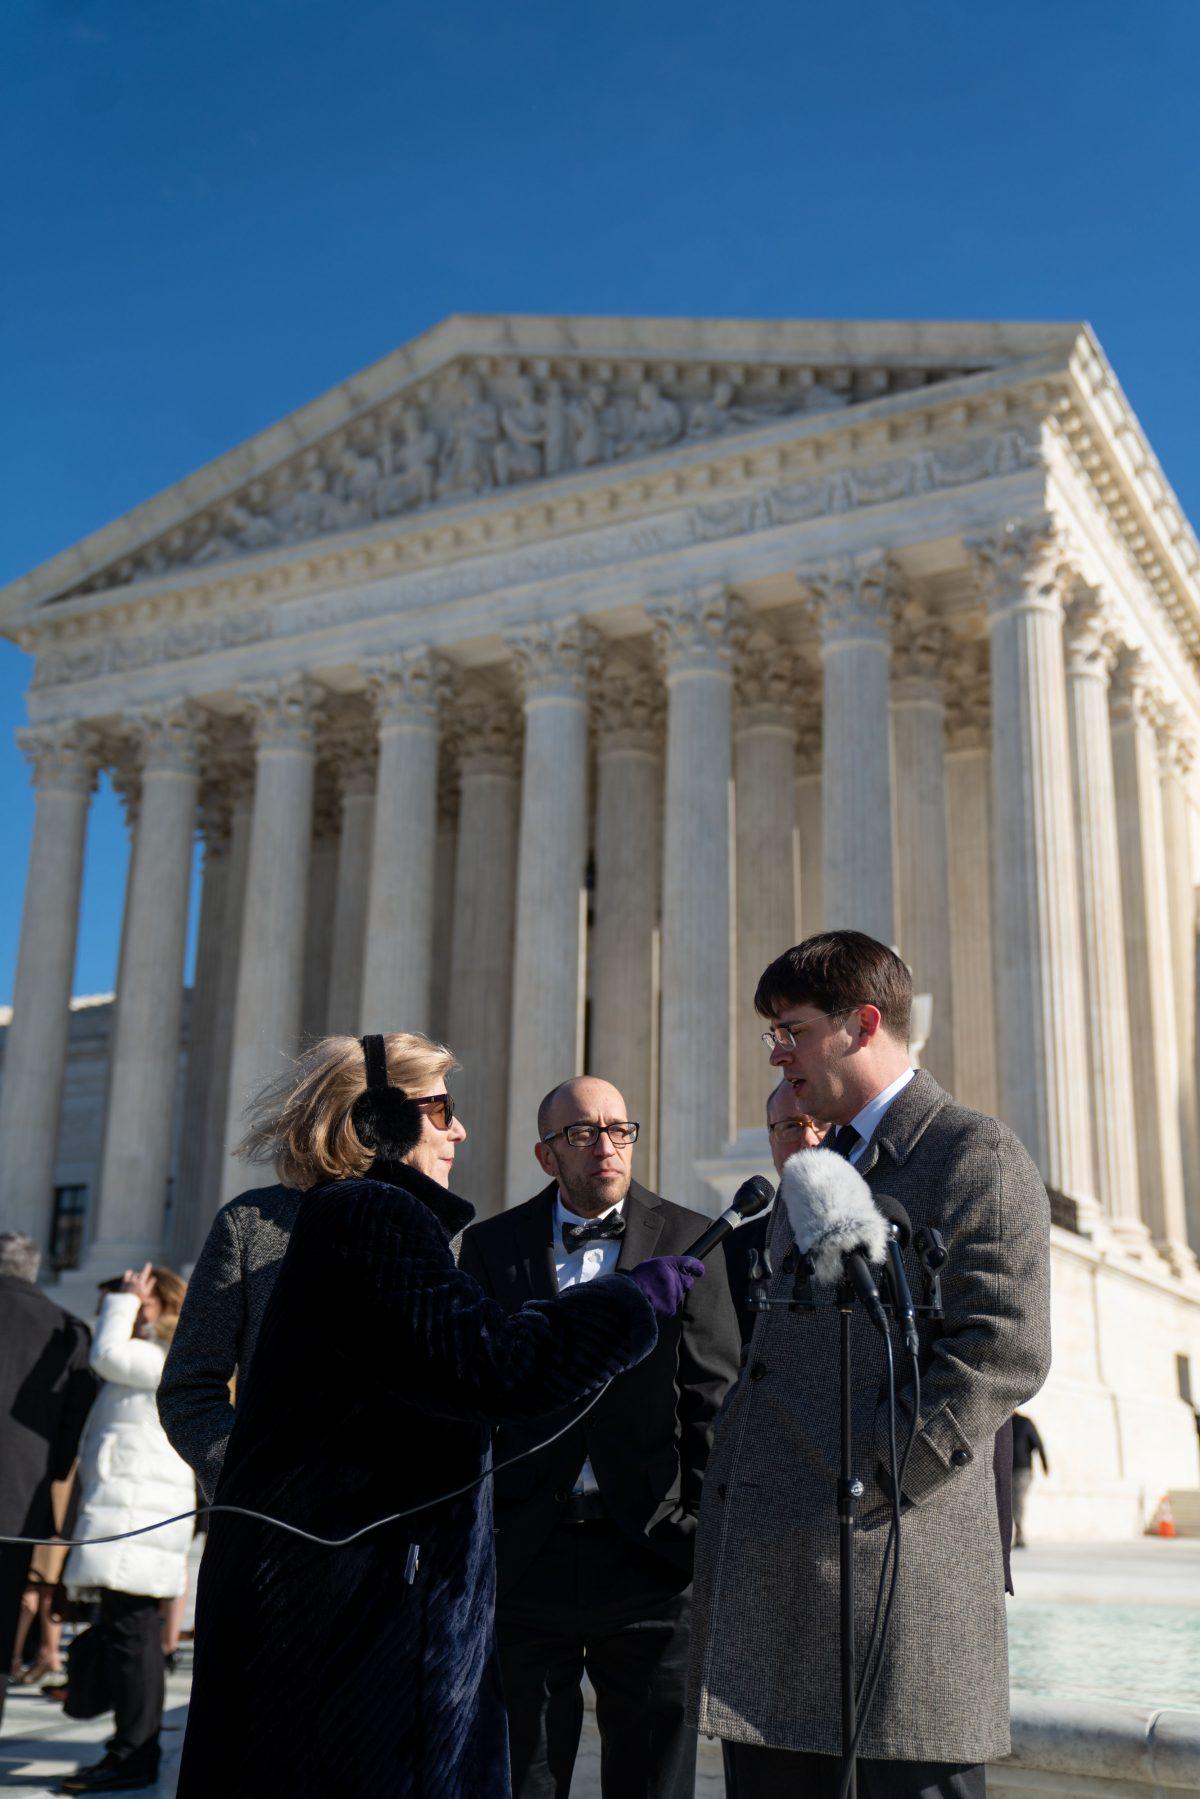 Tyson Timbs (C) and senior Institute of Justice attorney Wesley Hottot (R) hold a press conference on the steps of the Supreme Court in Washinton on Nov. 28, 2018. (Institute of Justice)